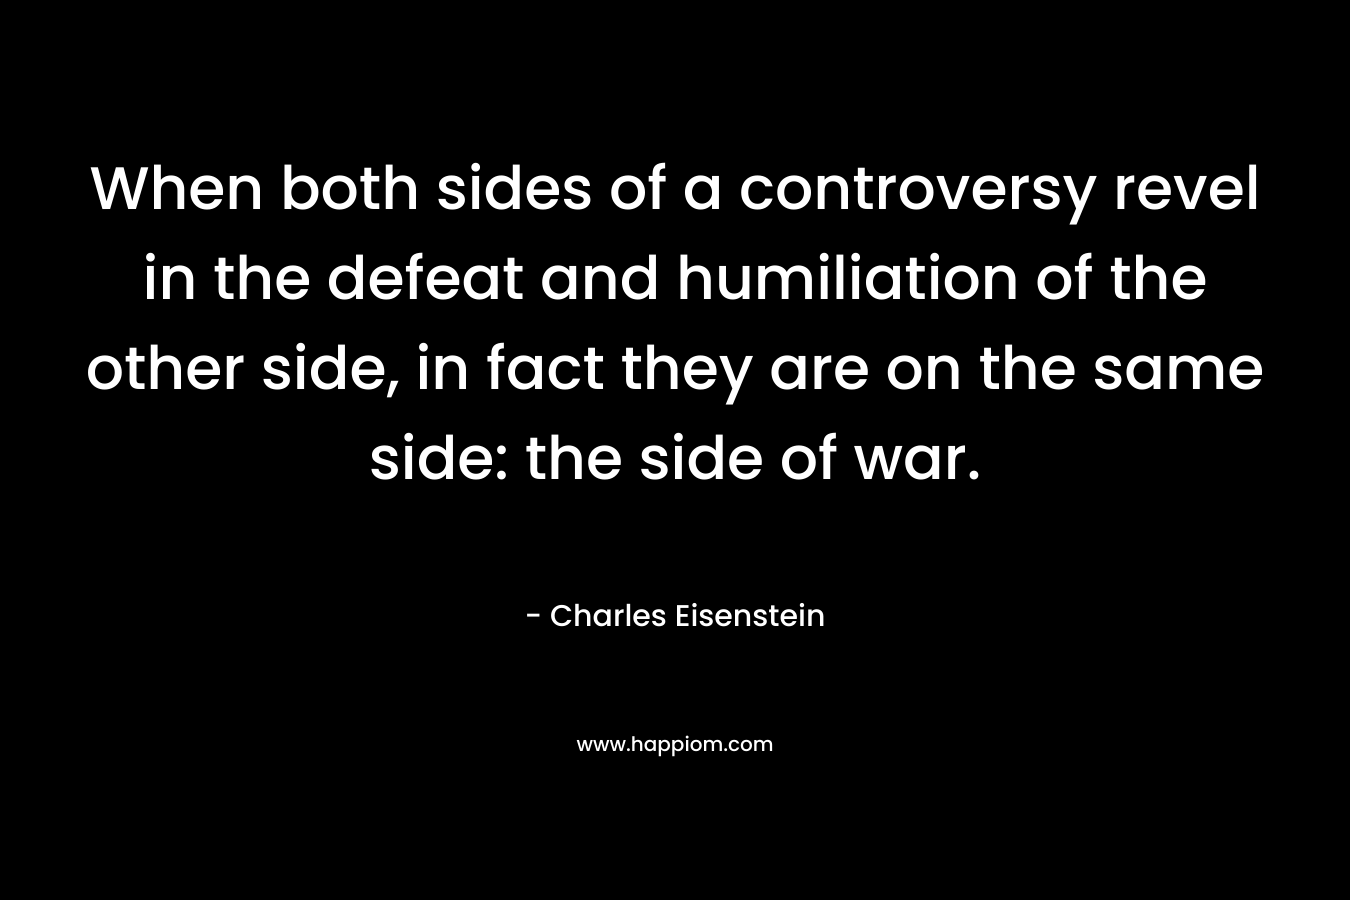 When both sides of a controversy revel in the defeat and humiliation of the other side, in fact they are on the same side: the side of war. – Charles Eisenstein